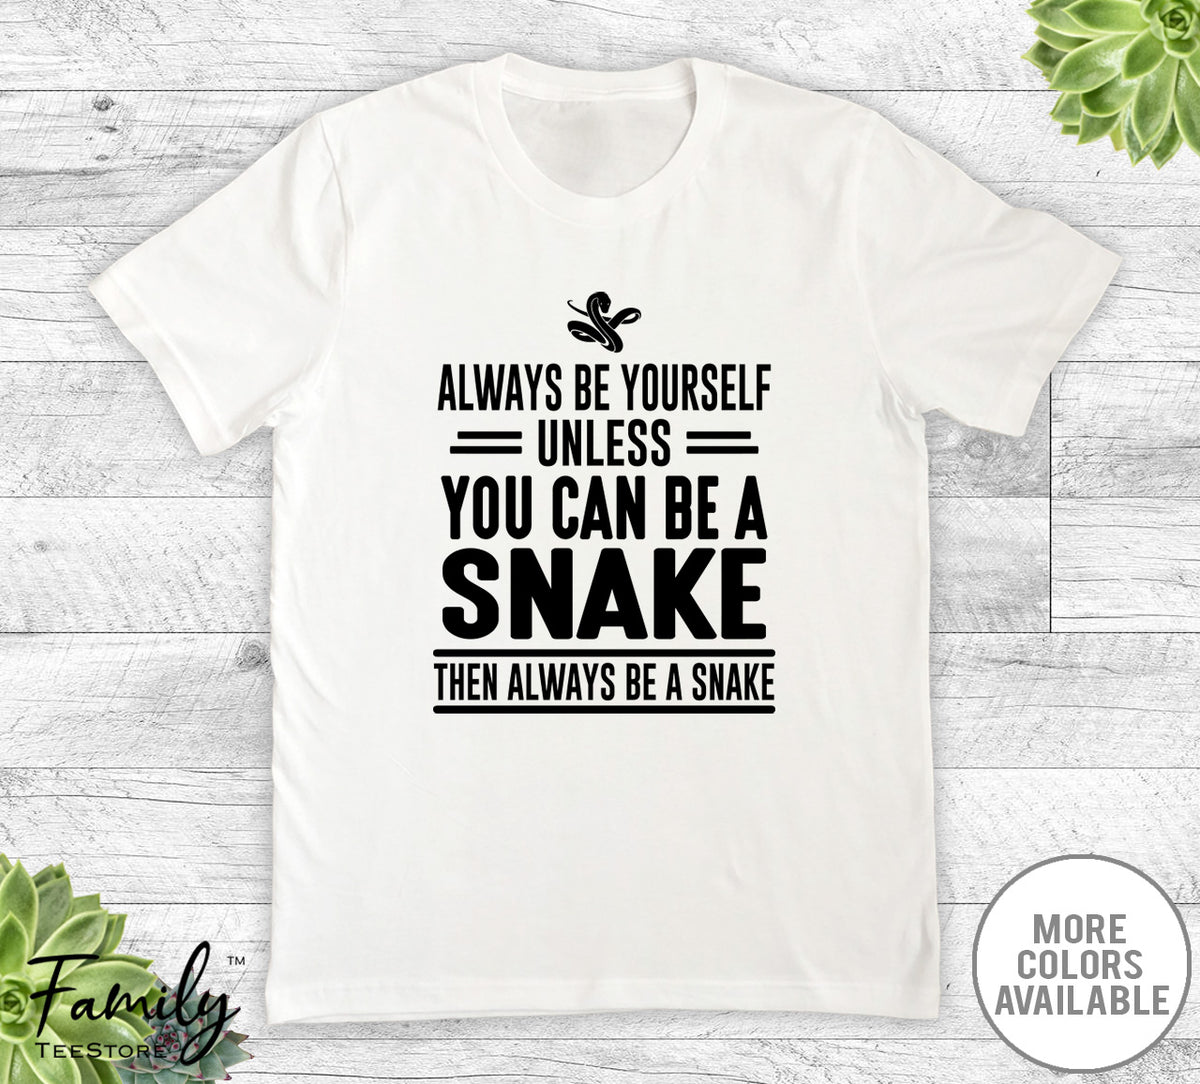 Always Be Yourself Unless You Can Be A Snake - Unisex T-shirt - Snake Shirt - Snake Gift - familyteeprints